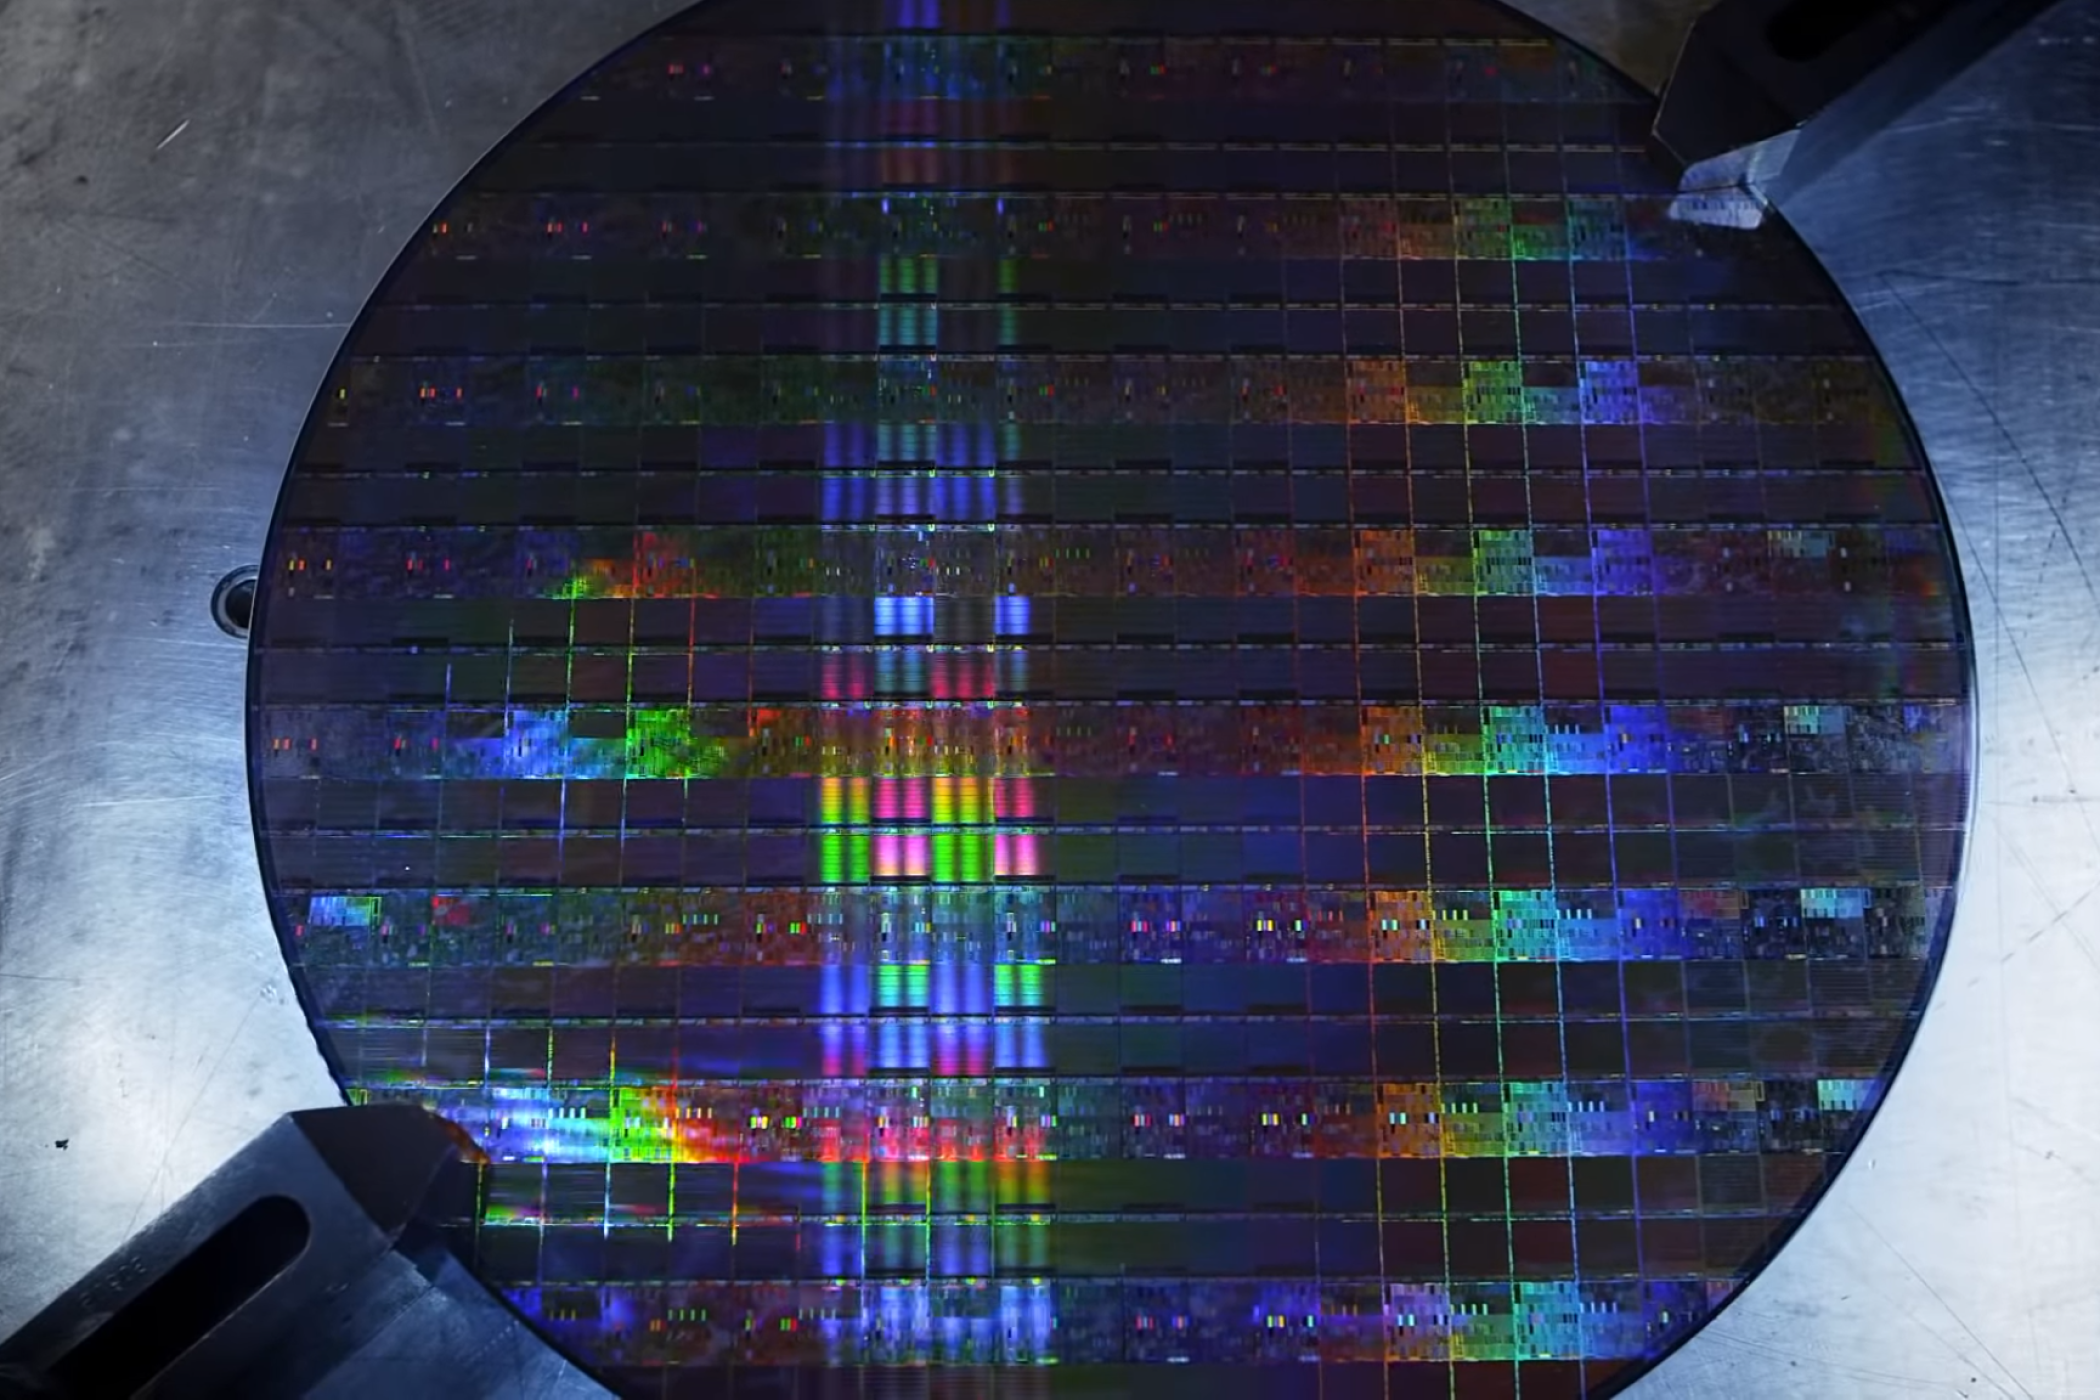 A silicon wafer of Intel CPUs moments before destruction.